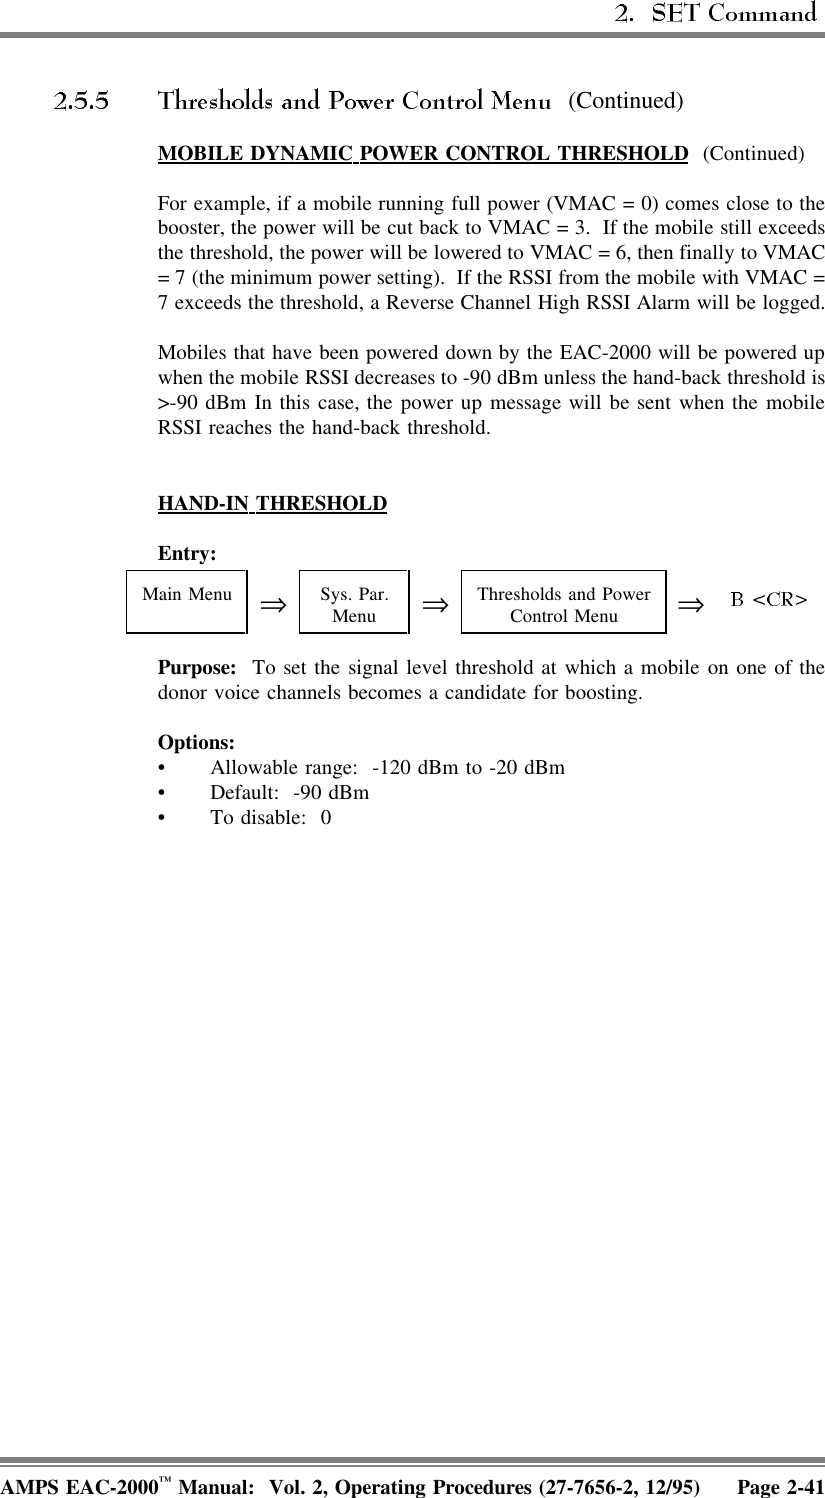  (Continued)MOBILE  DYNAMIC  POWER  CONTROL  THRESHOLD (Continued)For example, if a mobile running full power (VMAC = 0) comes close to thebooster, the power will be cut back to VMAC = 3.  If the mobile still exceedsthe threshold, the power will be lowered to VMAC = 6, then finally to VMAC= 7 (the minimum power setting).  If the RSSI from the mobile with VMAC =7 exceeds the threshold, a Reverse Channel High RSSI Alarm will be logged.Mobiles that have been powered down by the EAC-2000 will be powered upwhen the mobile RSSI decreases to -90 dBm unless the hand-back threshold is&gt;-90 dBm In this case, the power up message will be sent when the mobileRSSI reaches the hand-back threshold.HAND-IN  THRESHOLDEntry: Main Menu ⇒Sys. Par.Menu ⇒Thresholds and PowerControl Menu ⇒Purpose:  To set the signal level threshold at which a mobile on one of thedonor voice channels becomes a candidate for boosting.Options:• Allowable range:  -120 dBm to -20 dBm• Default: -90 dBm• To disable:  0AMPS EAC-2000™ Manual:  Vol. 2, Operating Procedures (27-7656-2, 12/95) Page 2-41